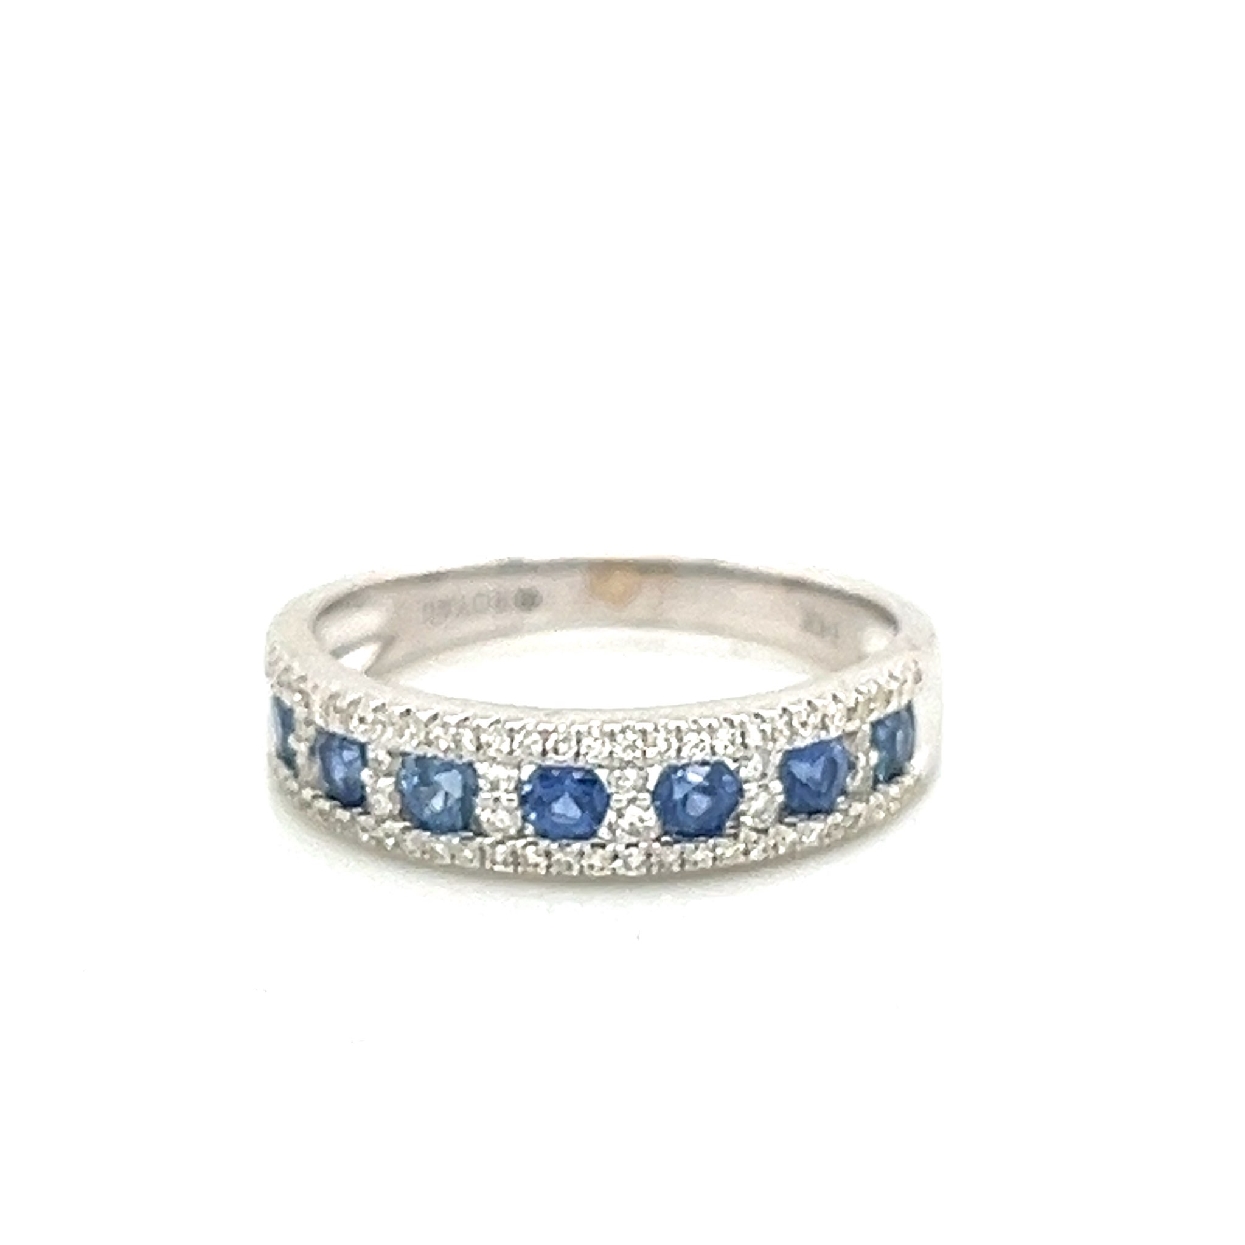 14K White Gold .44CT Sapphire and Diamond Ring 

Size 7